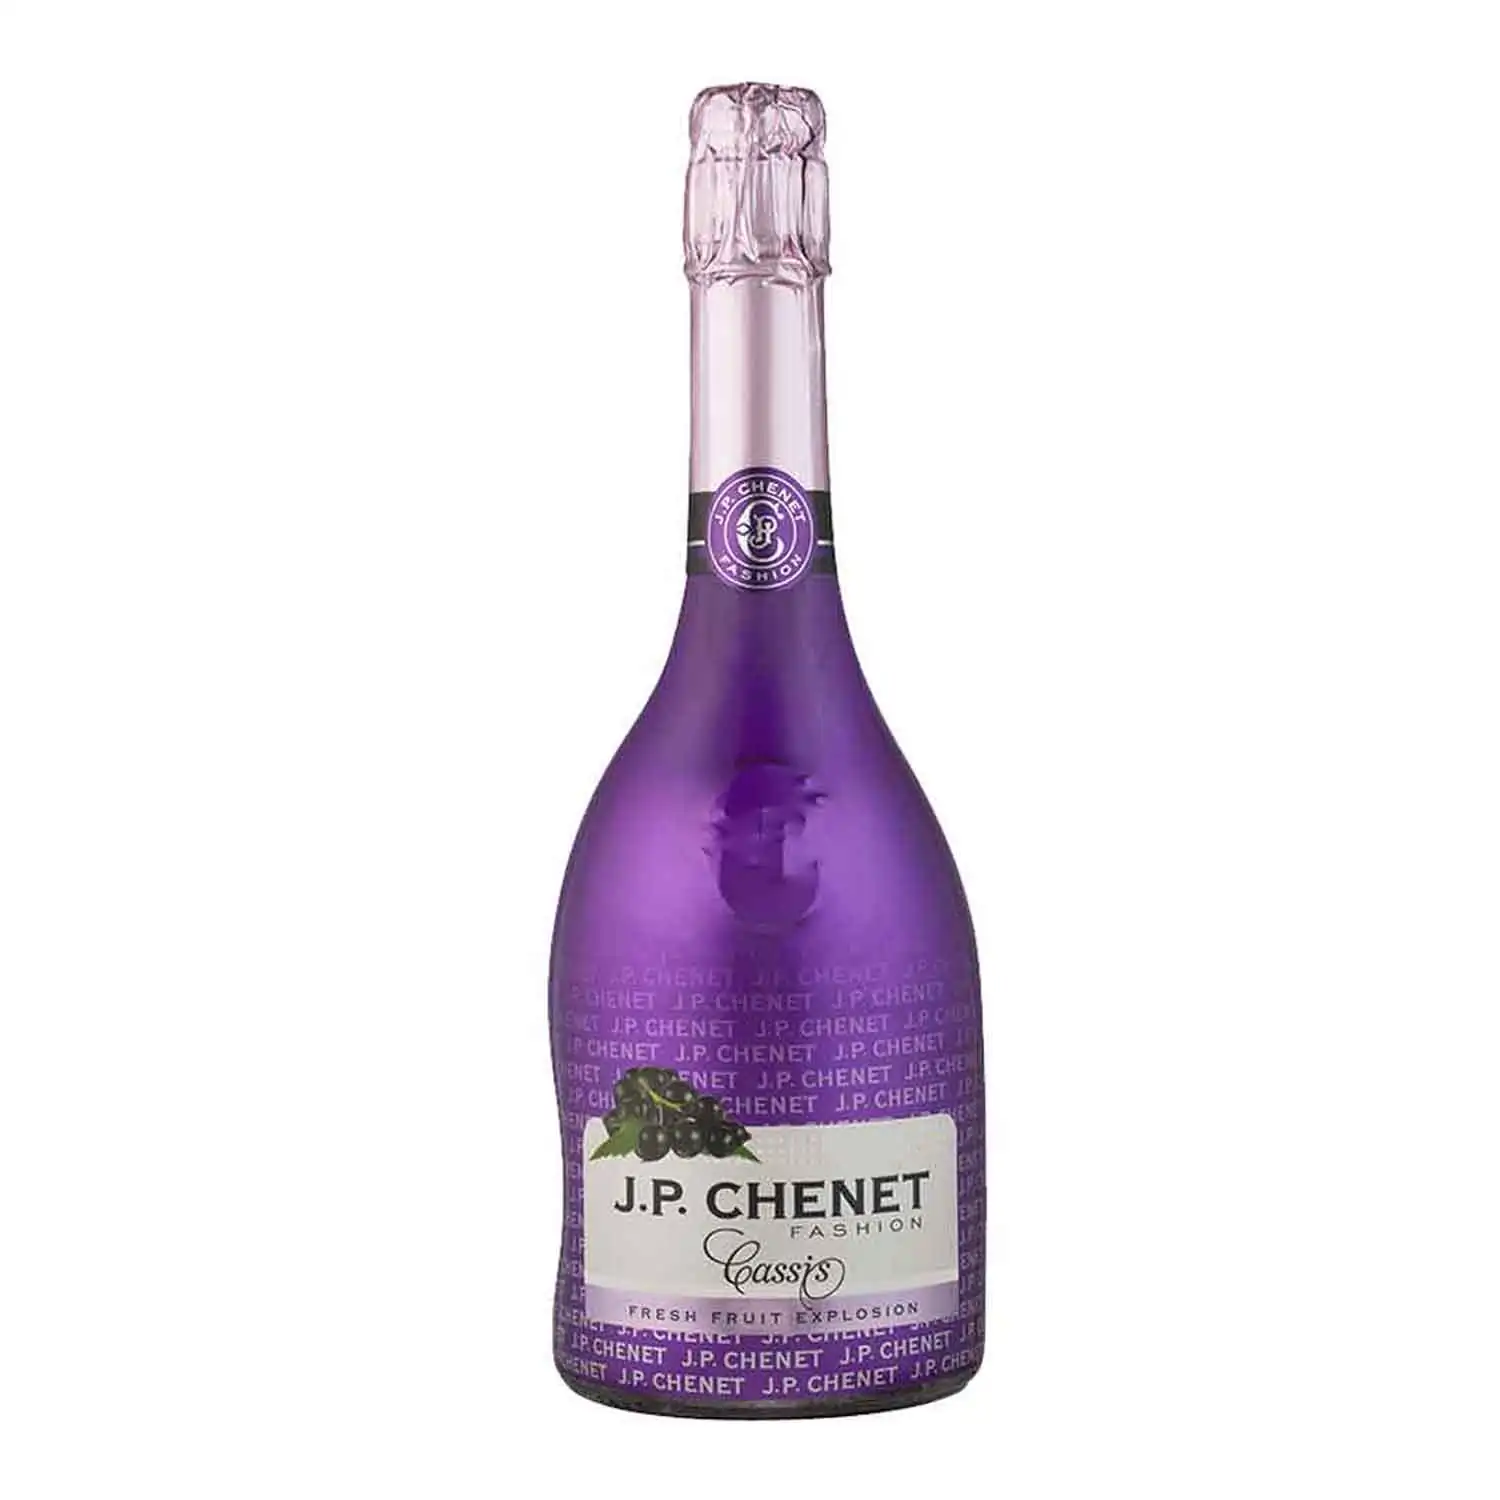 JP Chenet fashion cassis 75cl Alc 12% - Buy at Real Tobacco